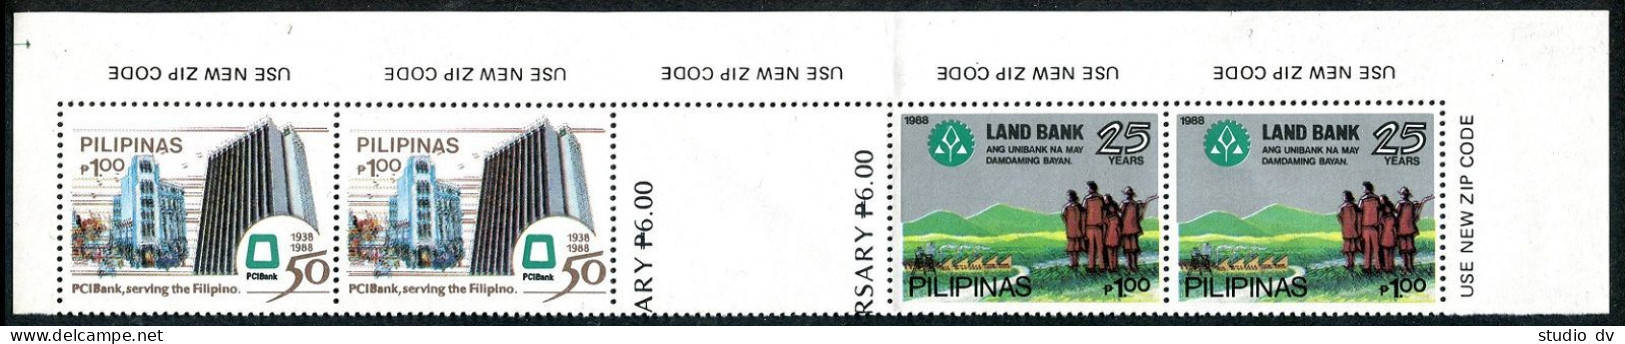 Philippines 1943-1944 Strip/2 Pairs, MNH. Mi 1872-1873. Land, Commercial  Banks. - Filipinas